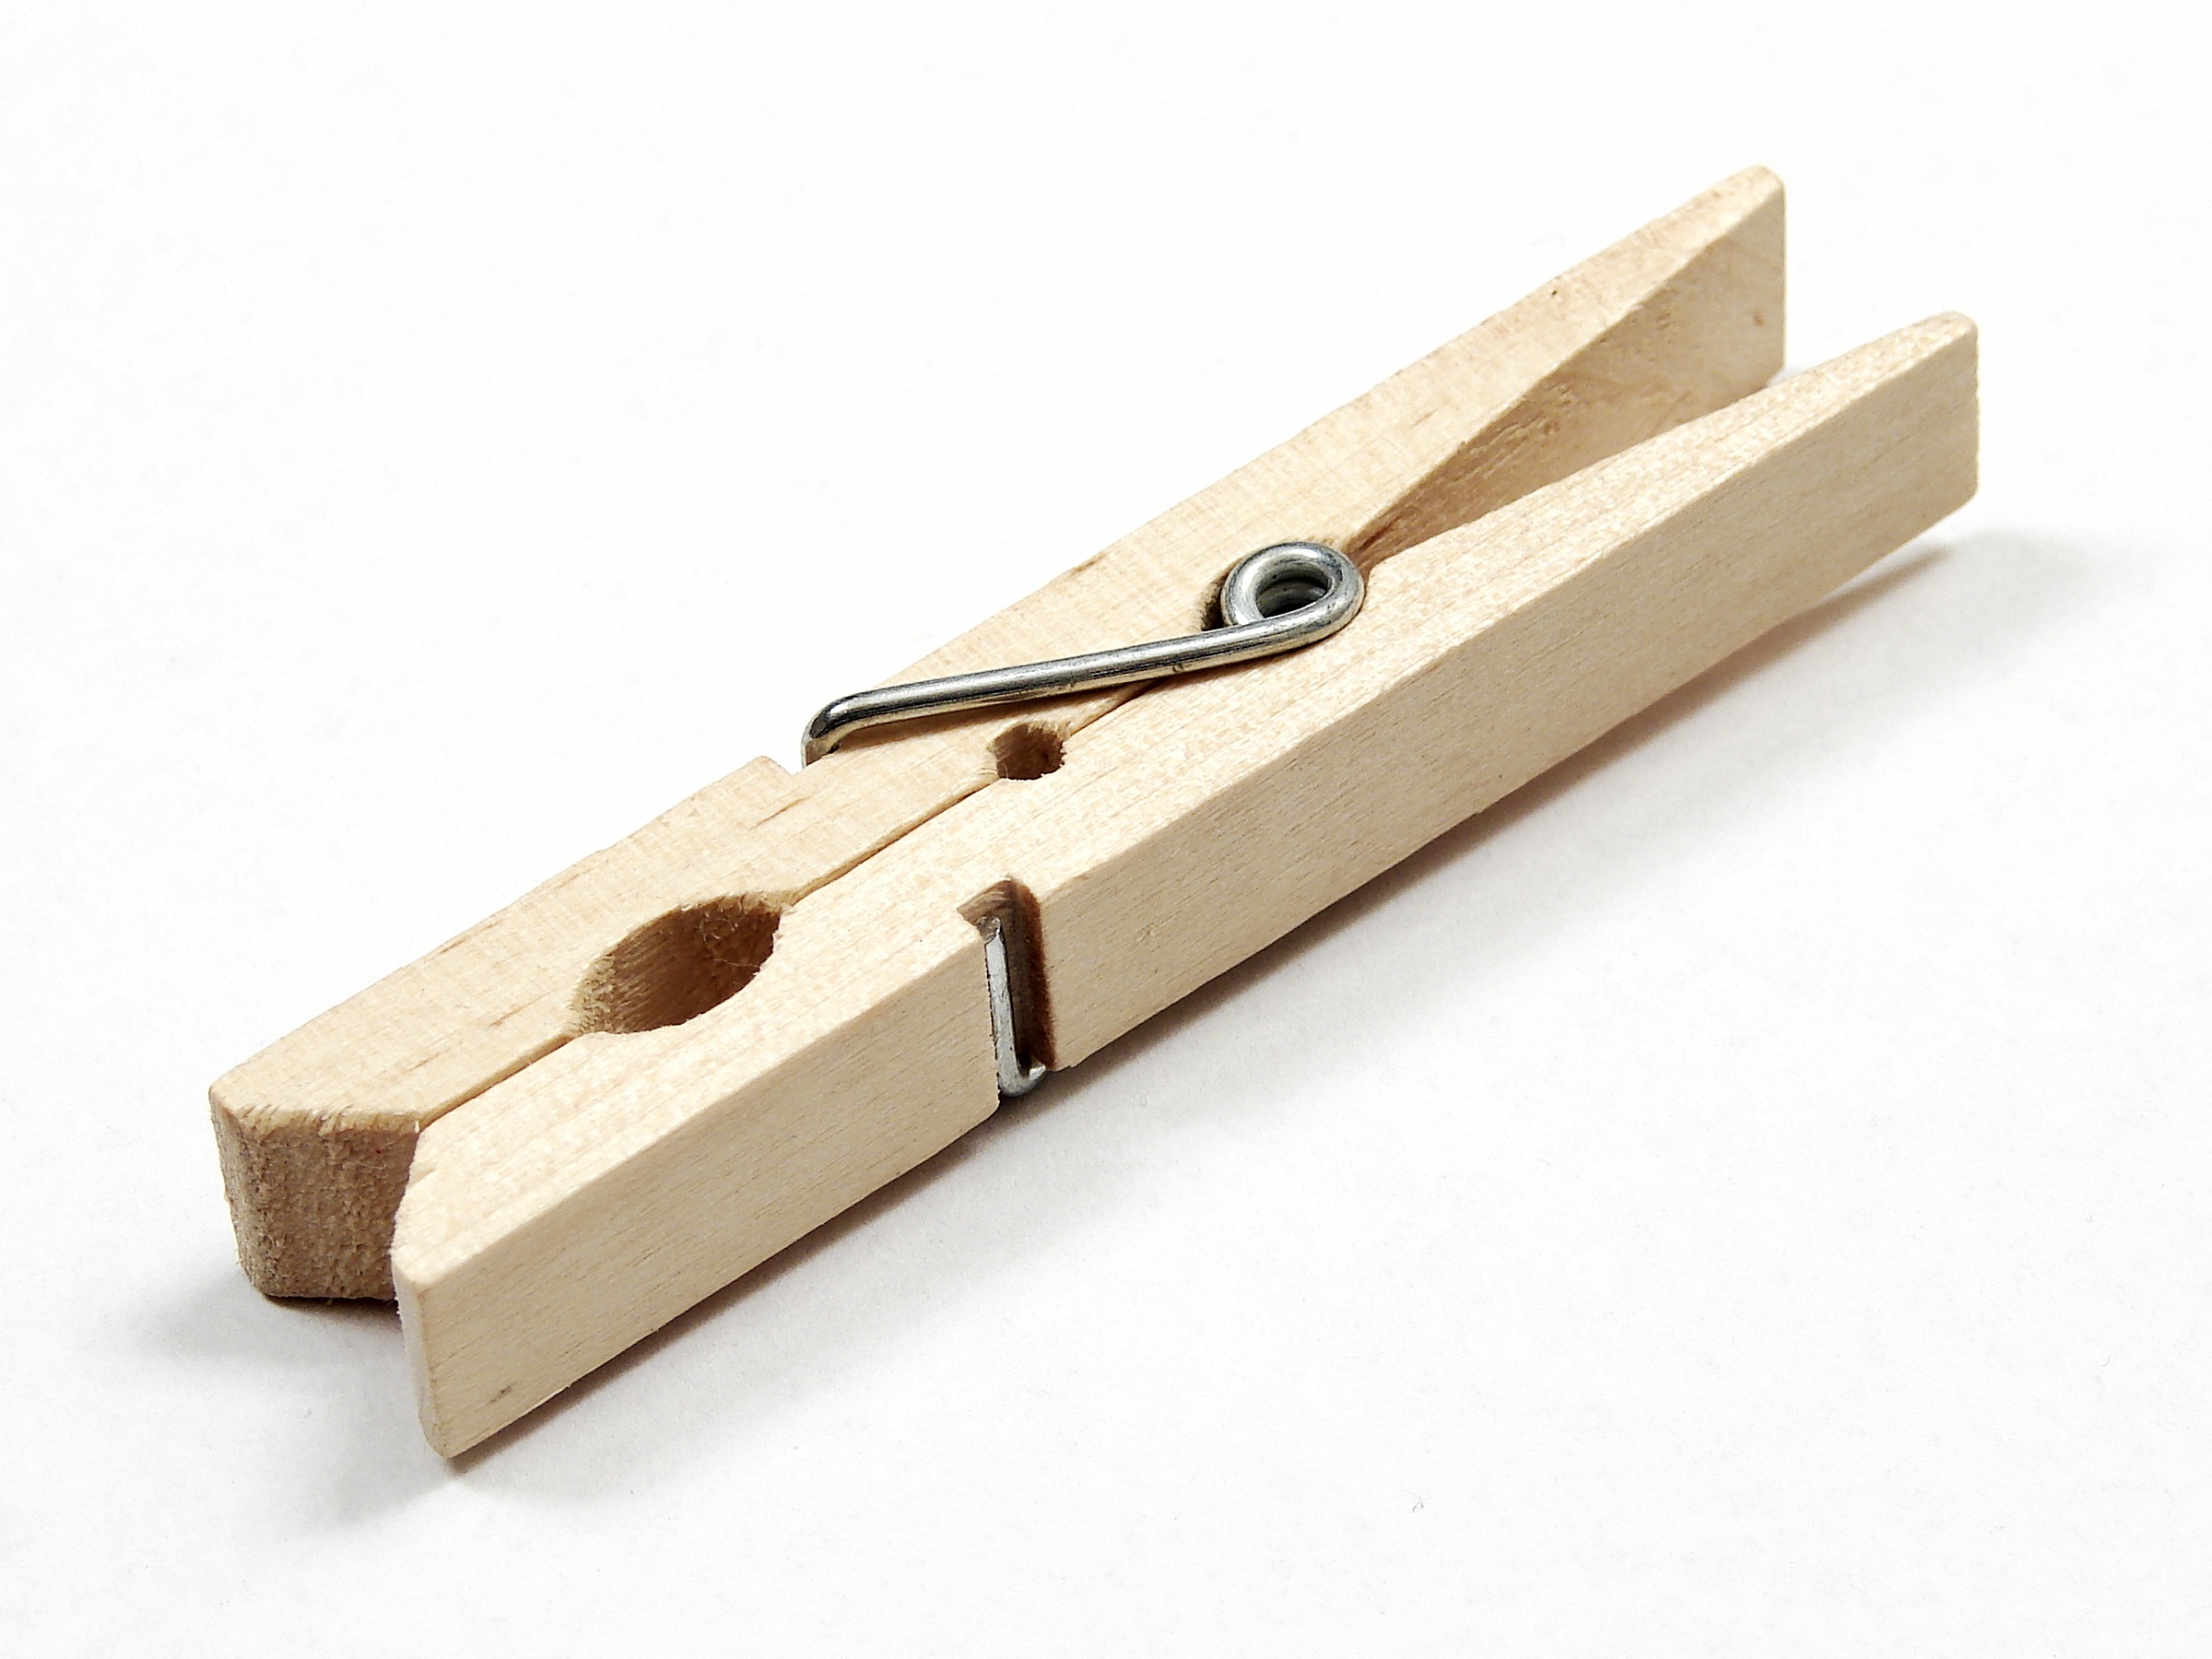 Lesson 21: Clothespin Catapult